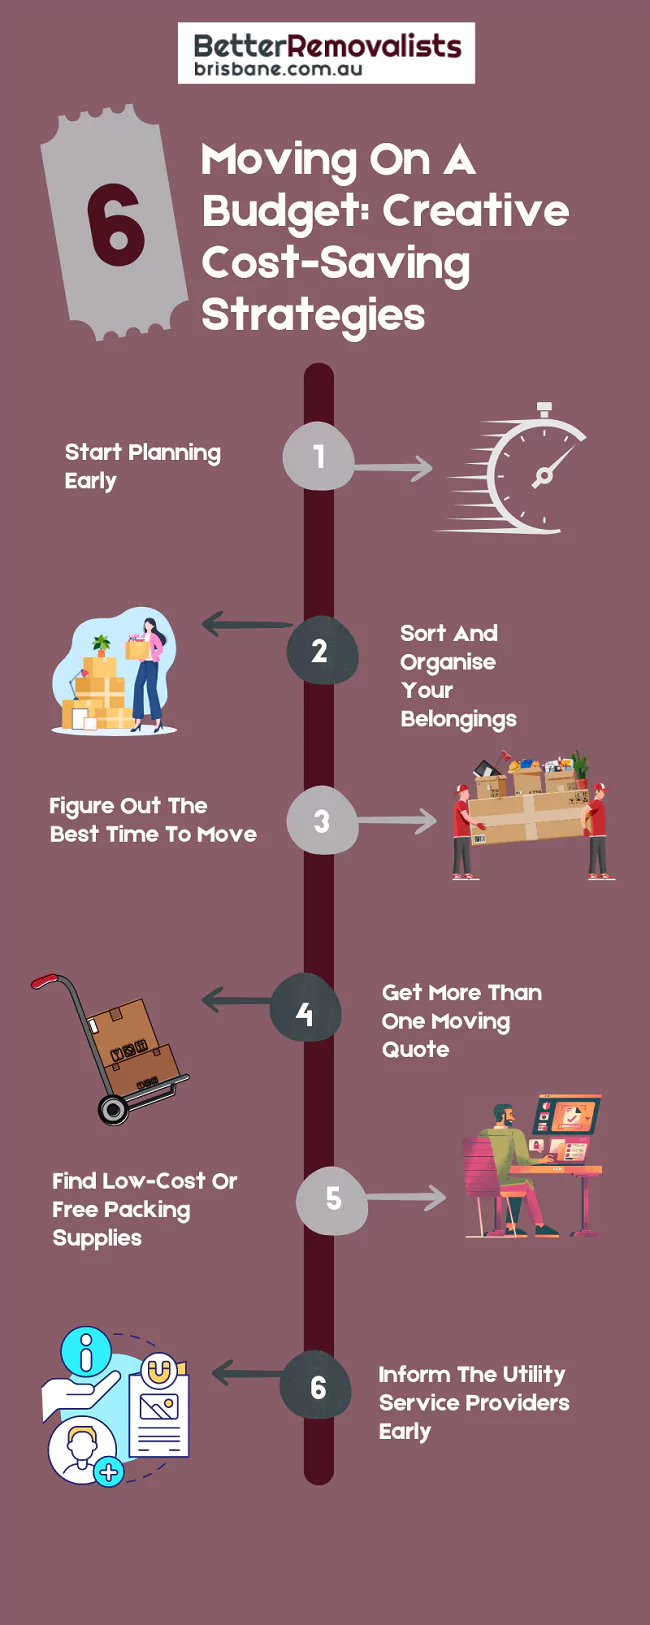 tips for moving on a budget